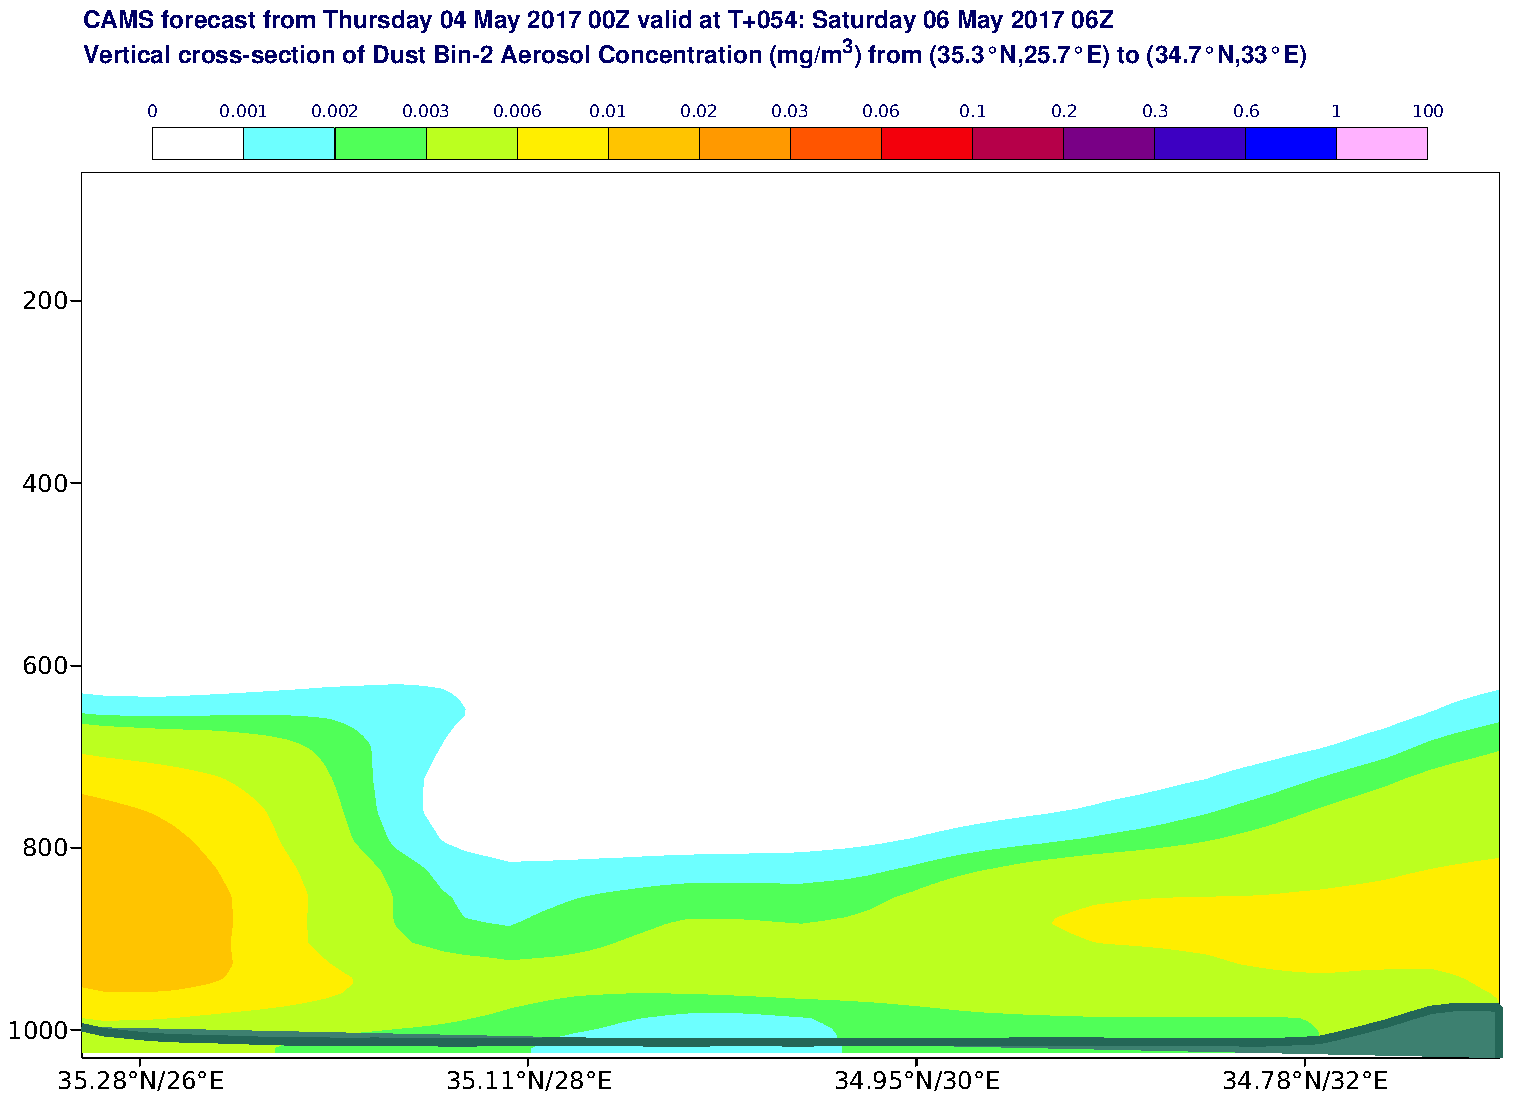 Vertical cross-section of Dust Bin-2 Aerosol Concentration (mg/m3) valid at T54 - 2017-05-06 06:00